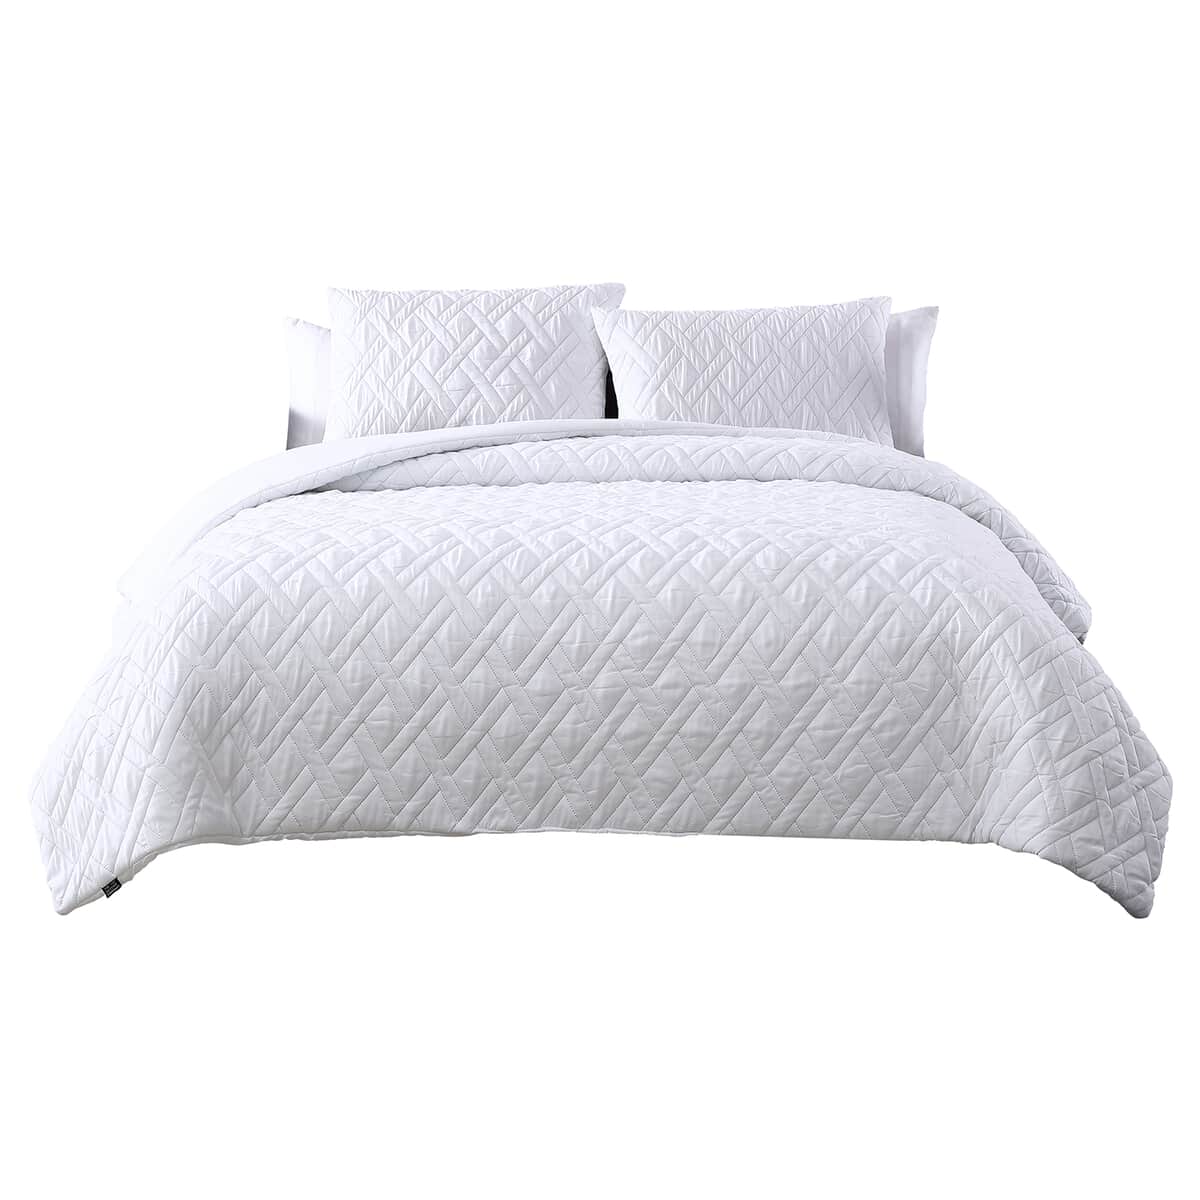 The Nesting Company- Larch 3 Piece Queen Comforter Set White image number 3